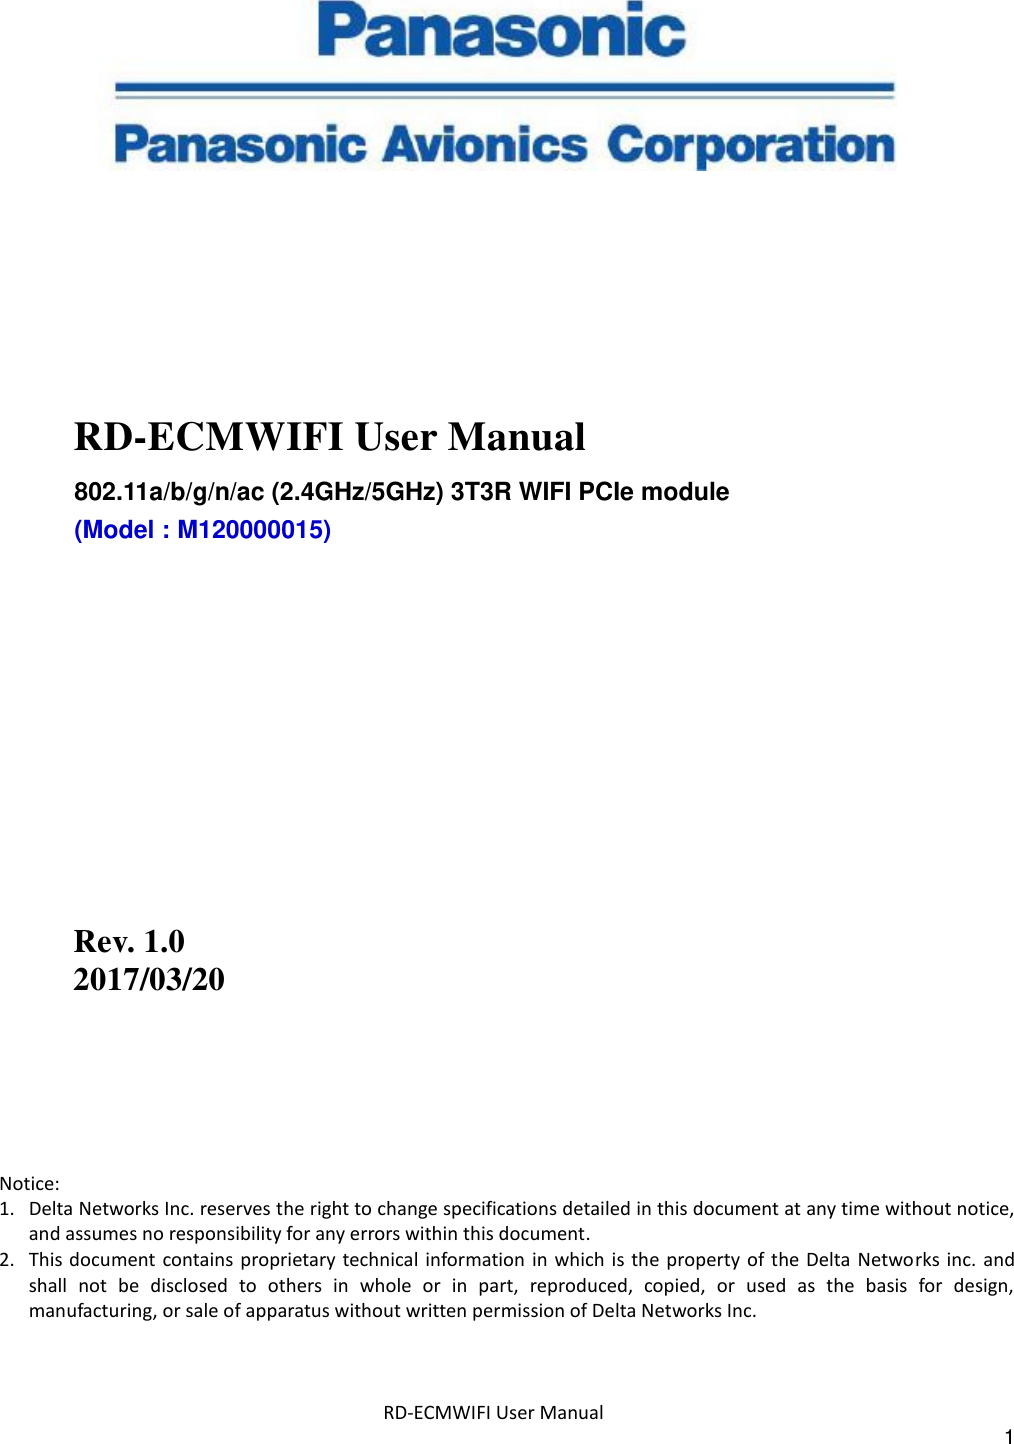  RD-ECMWIFI User Manual 1         RD-ECMWIFI User Manual 802.11a/b/g/n/ac (2.4GHz/5GHz) 3T3R WIFI PCIe module (Model : M120000015)              Rev. 1.0   2017/03/20       Notice: 1. Delta Networks Inc. reserves the right to change specifications detailed in this document at any time without notice, and assumes no responsibility for any errors within this document. 2. This document  contains proprietary technical information in which is  the property of the  Delta  Networks inc.  and shall  not  be  disclosed  to  others  in  whole  or  in  part,  reproduced,  copied,  or  used  as  the  basis  for  design, manufacturing, or sale of apparatus without written permission of Delta Networks Inc. 